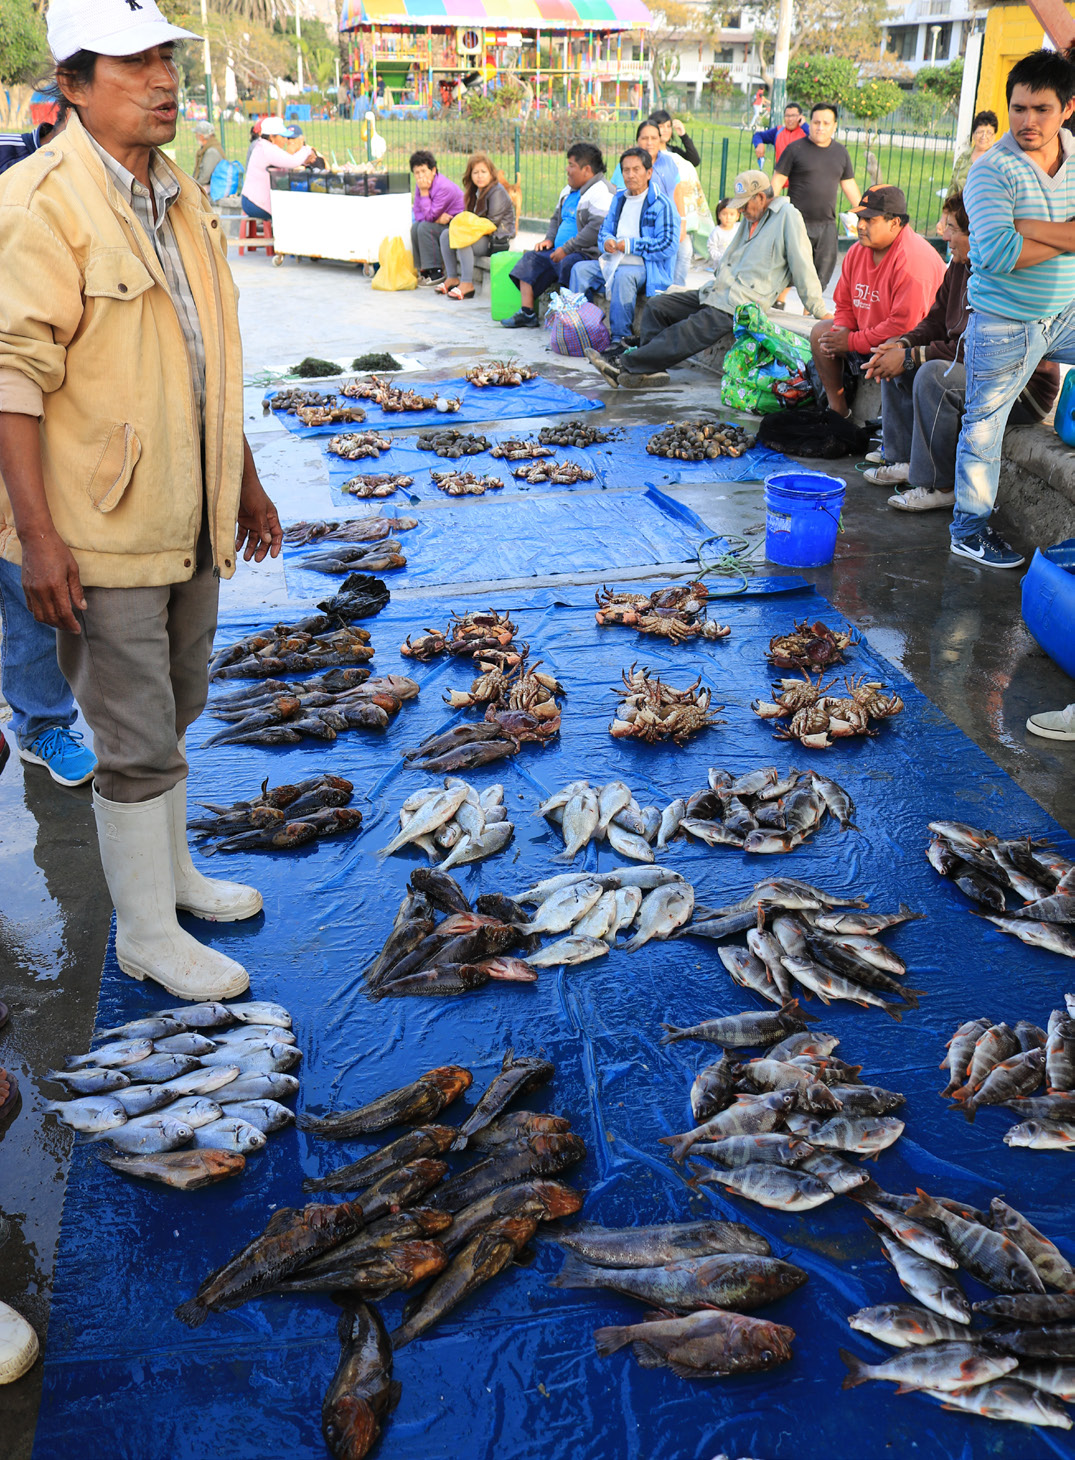 A fisher’s catch of the day on sale dockside, Peru. Photo © Jeremy Rude/TNC